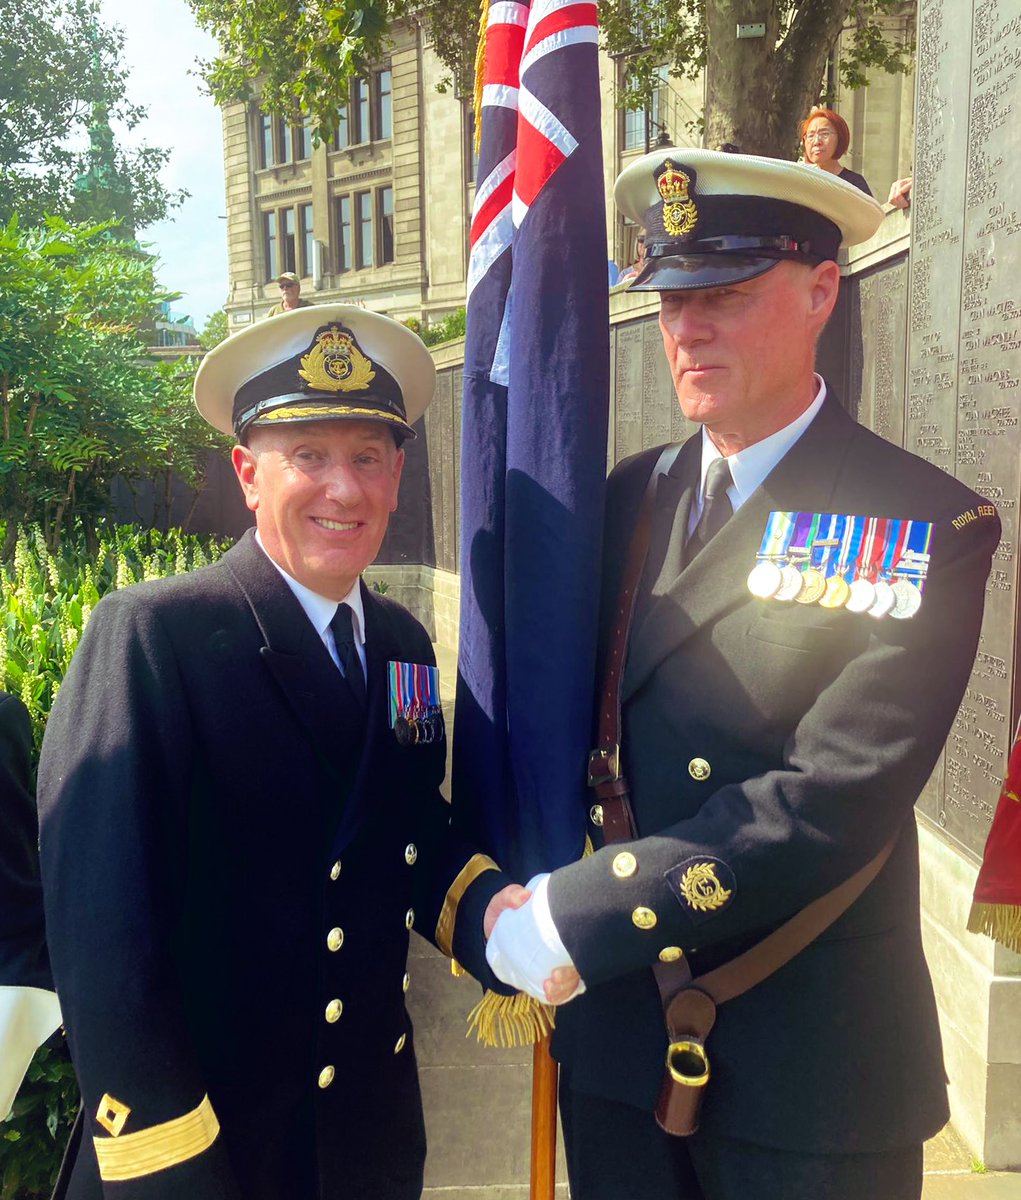 CPO Etwell has been awarded the Merchant Navy Medal on #MerchantNavyDay23 Over 50 years service at sea & representing the RFA at countless events. BZ on a fantastic career & being an outstanding role model! @MNWBUK @CdreDavidEagles @MartinJConnell @RoyalNavy @Mark_J_Harper